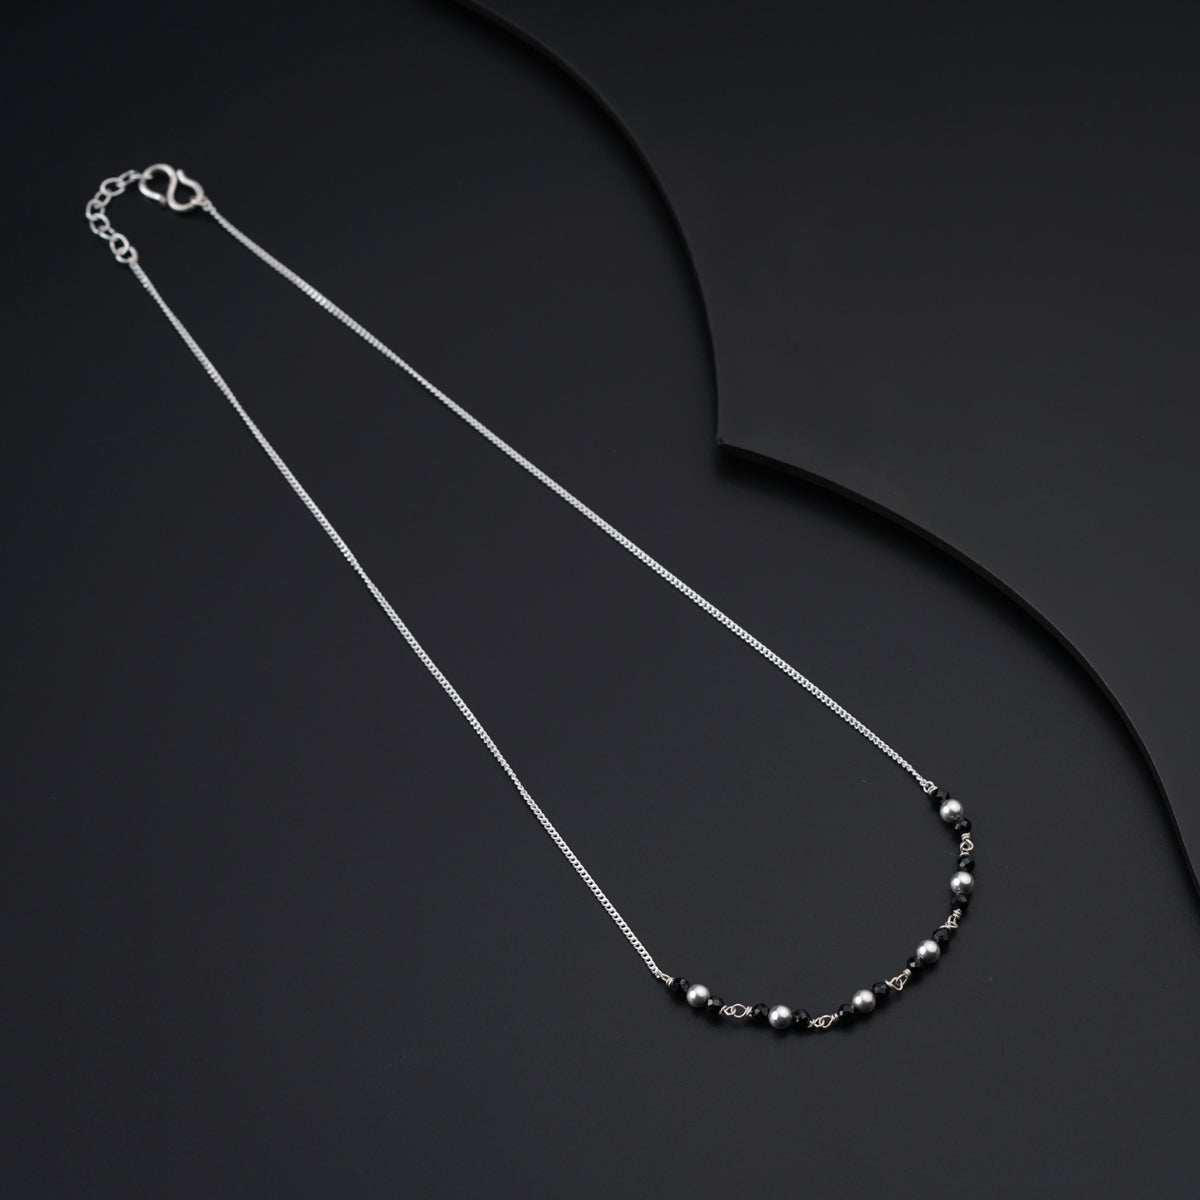 a black and white necklace on a black background